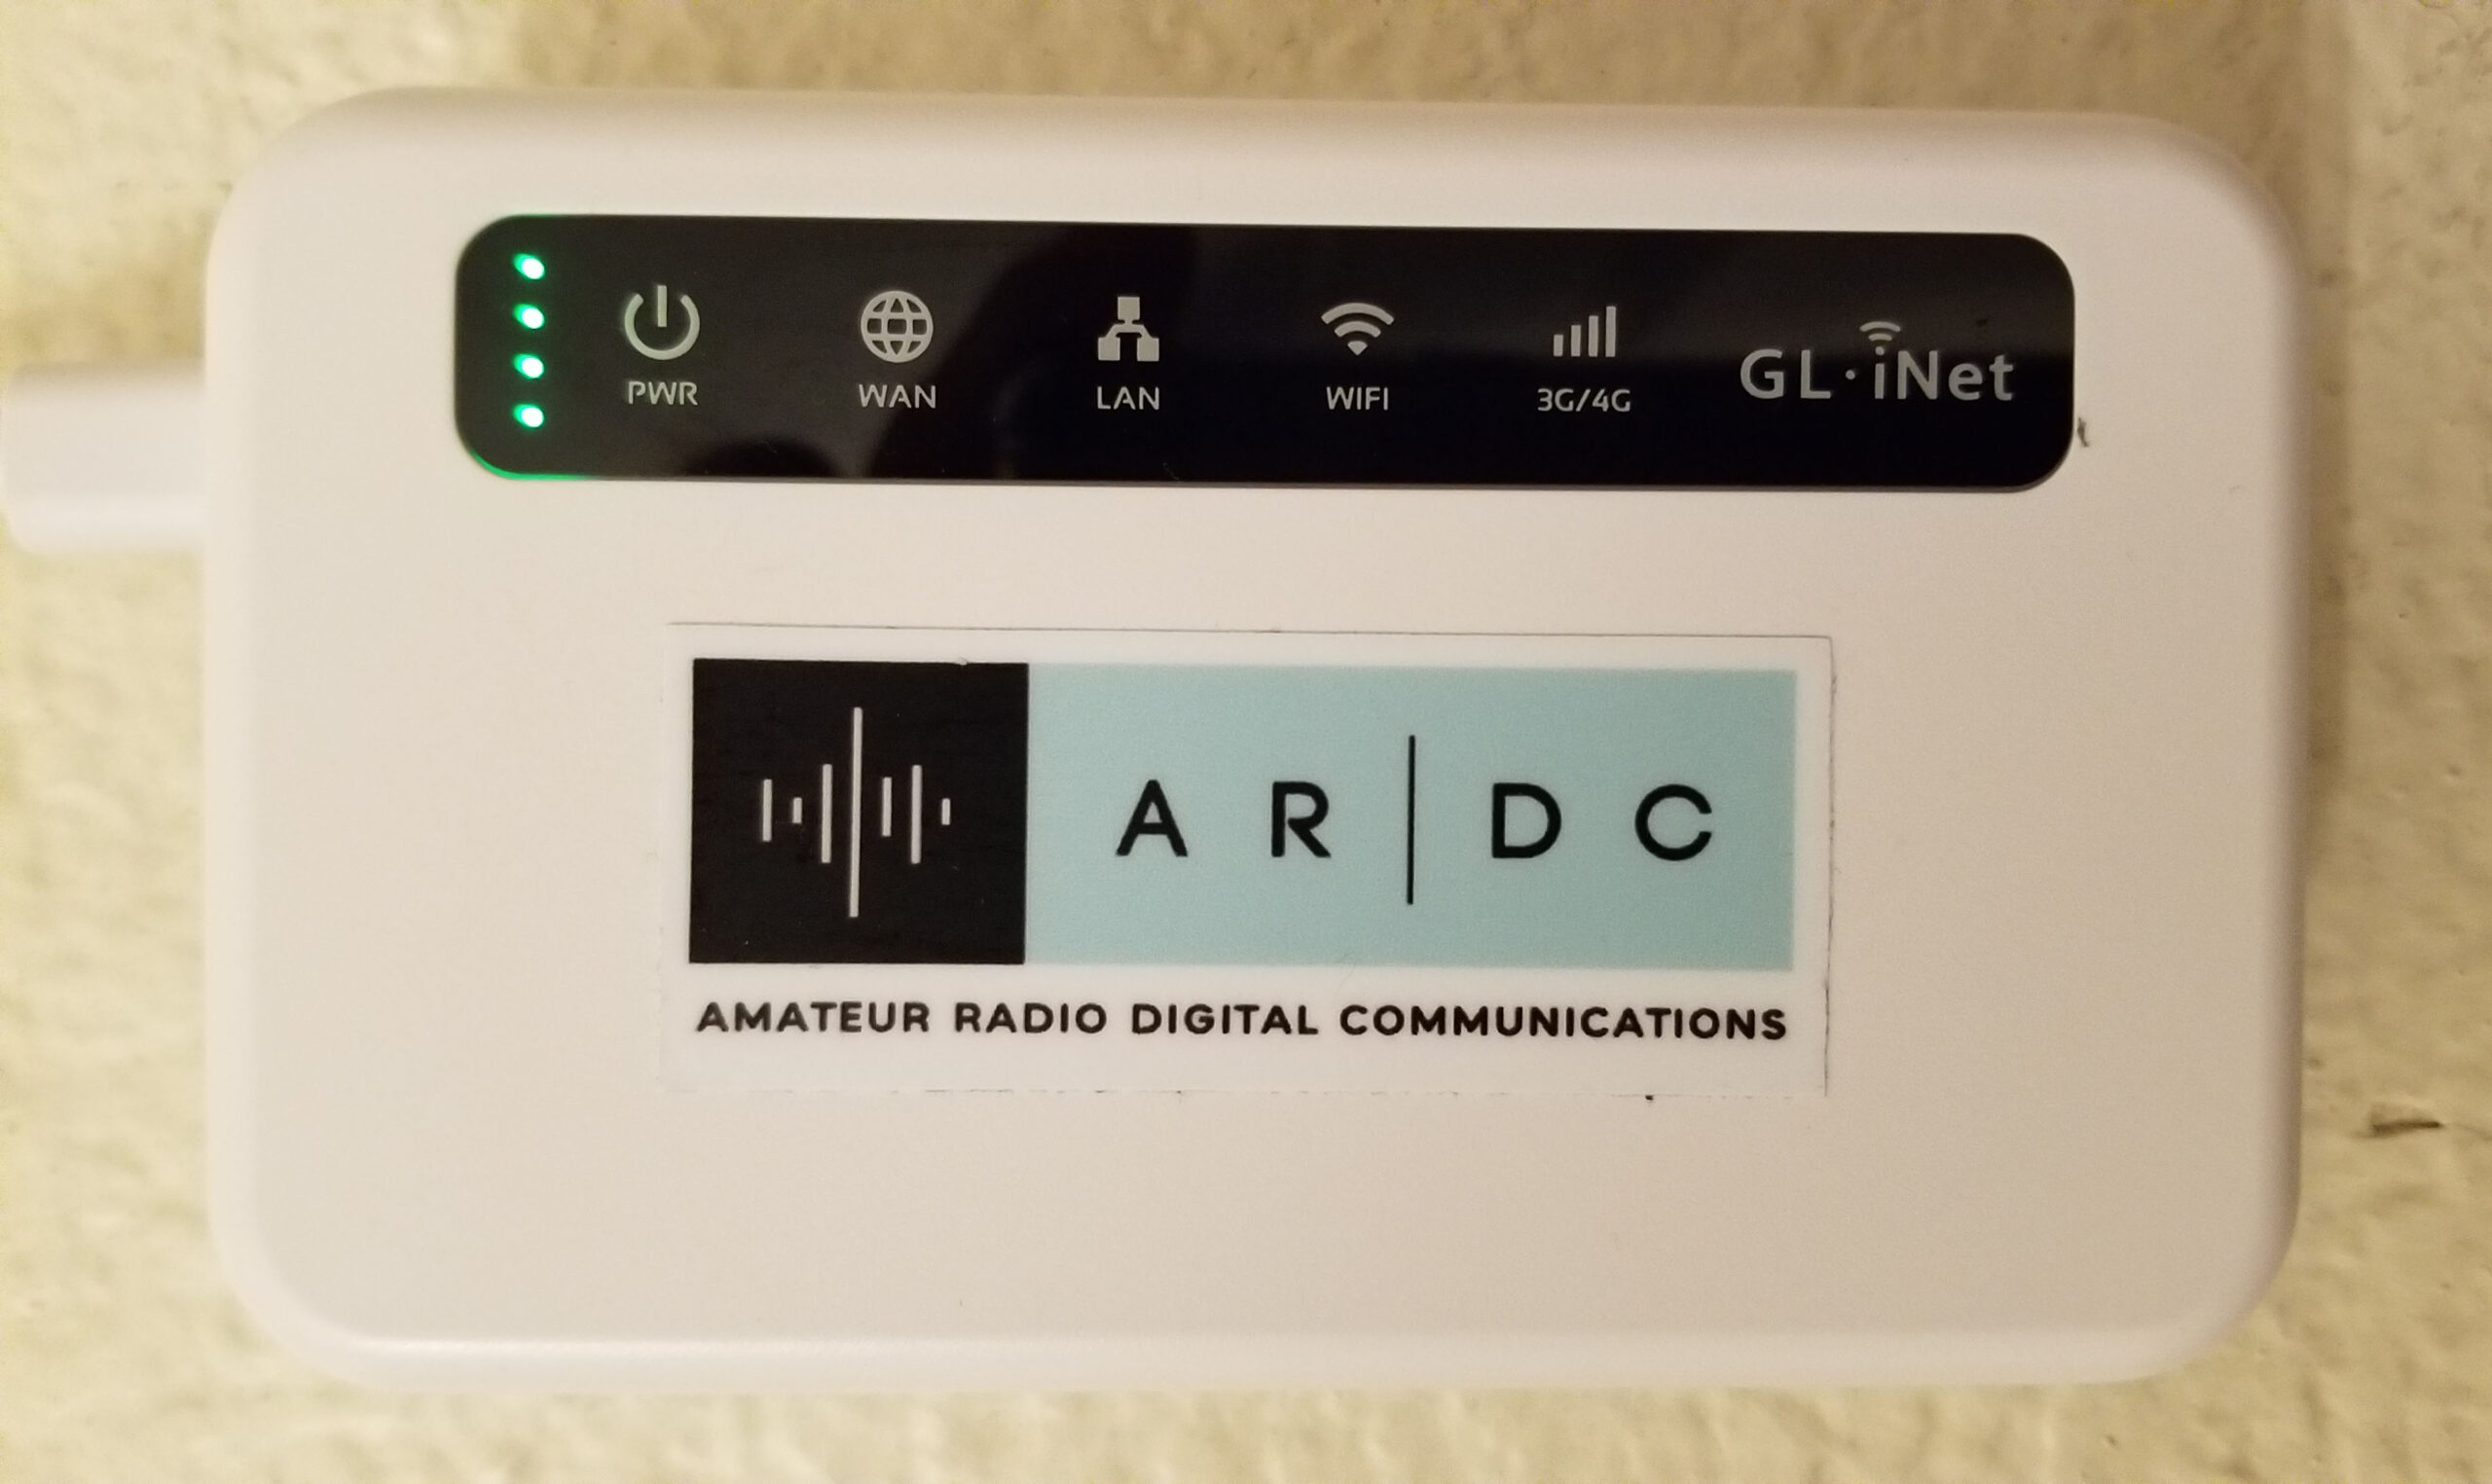 GL.iNet Router used for the Amateur Radio Digital Communications (ARDC) 44Net VPN